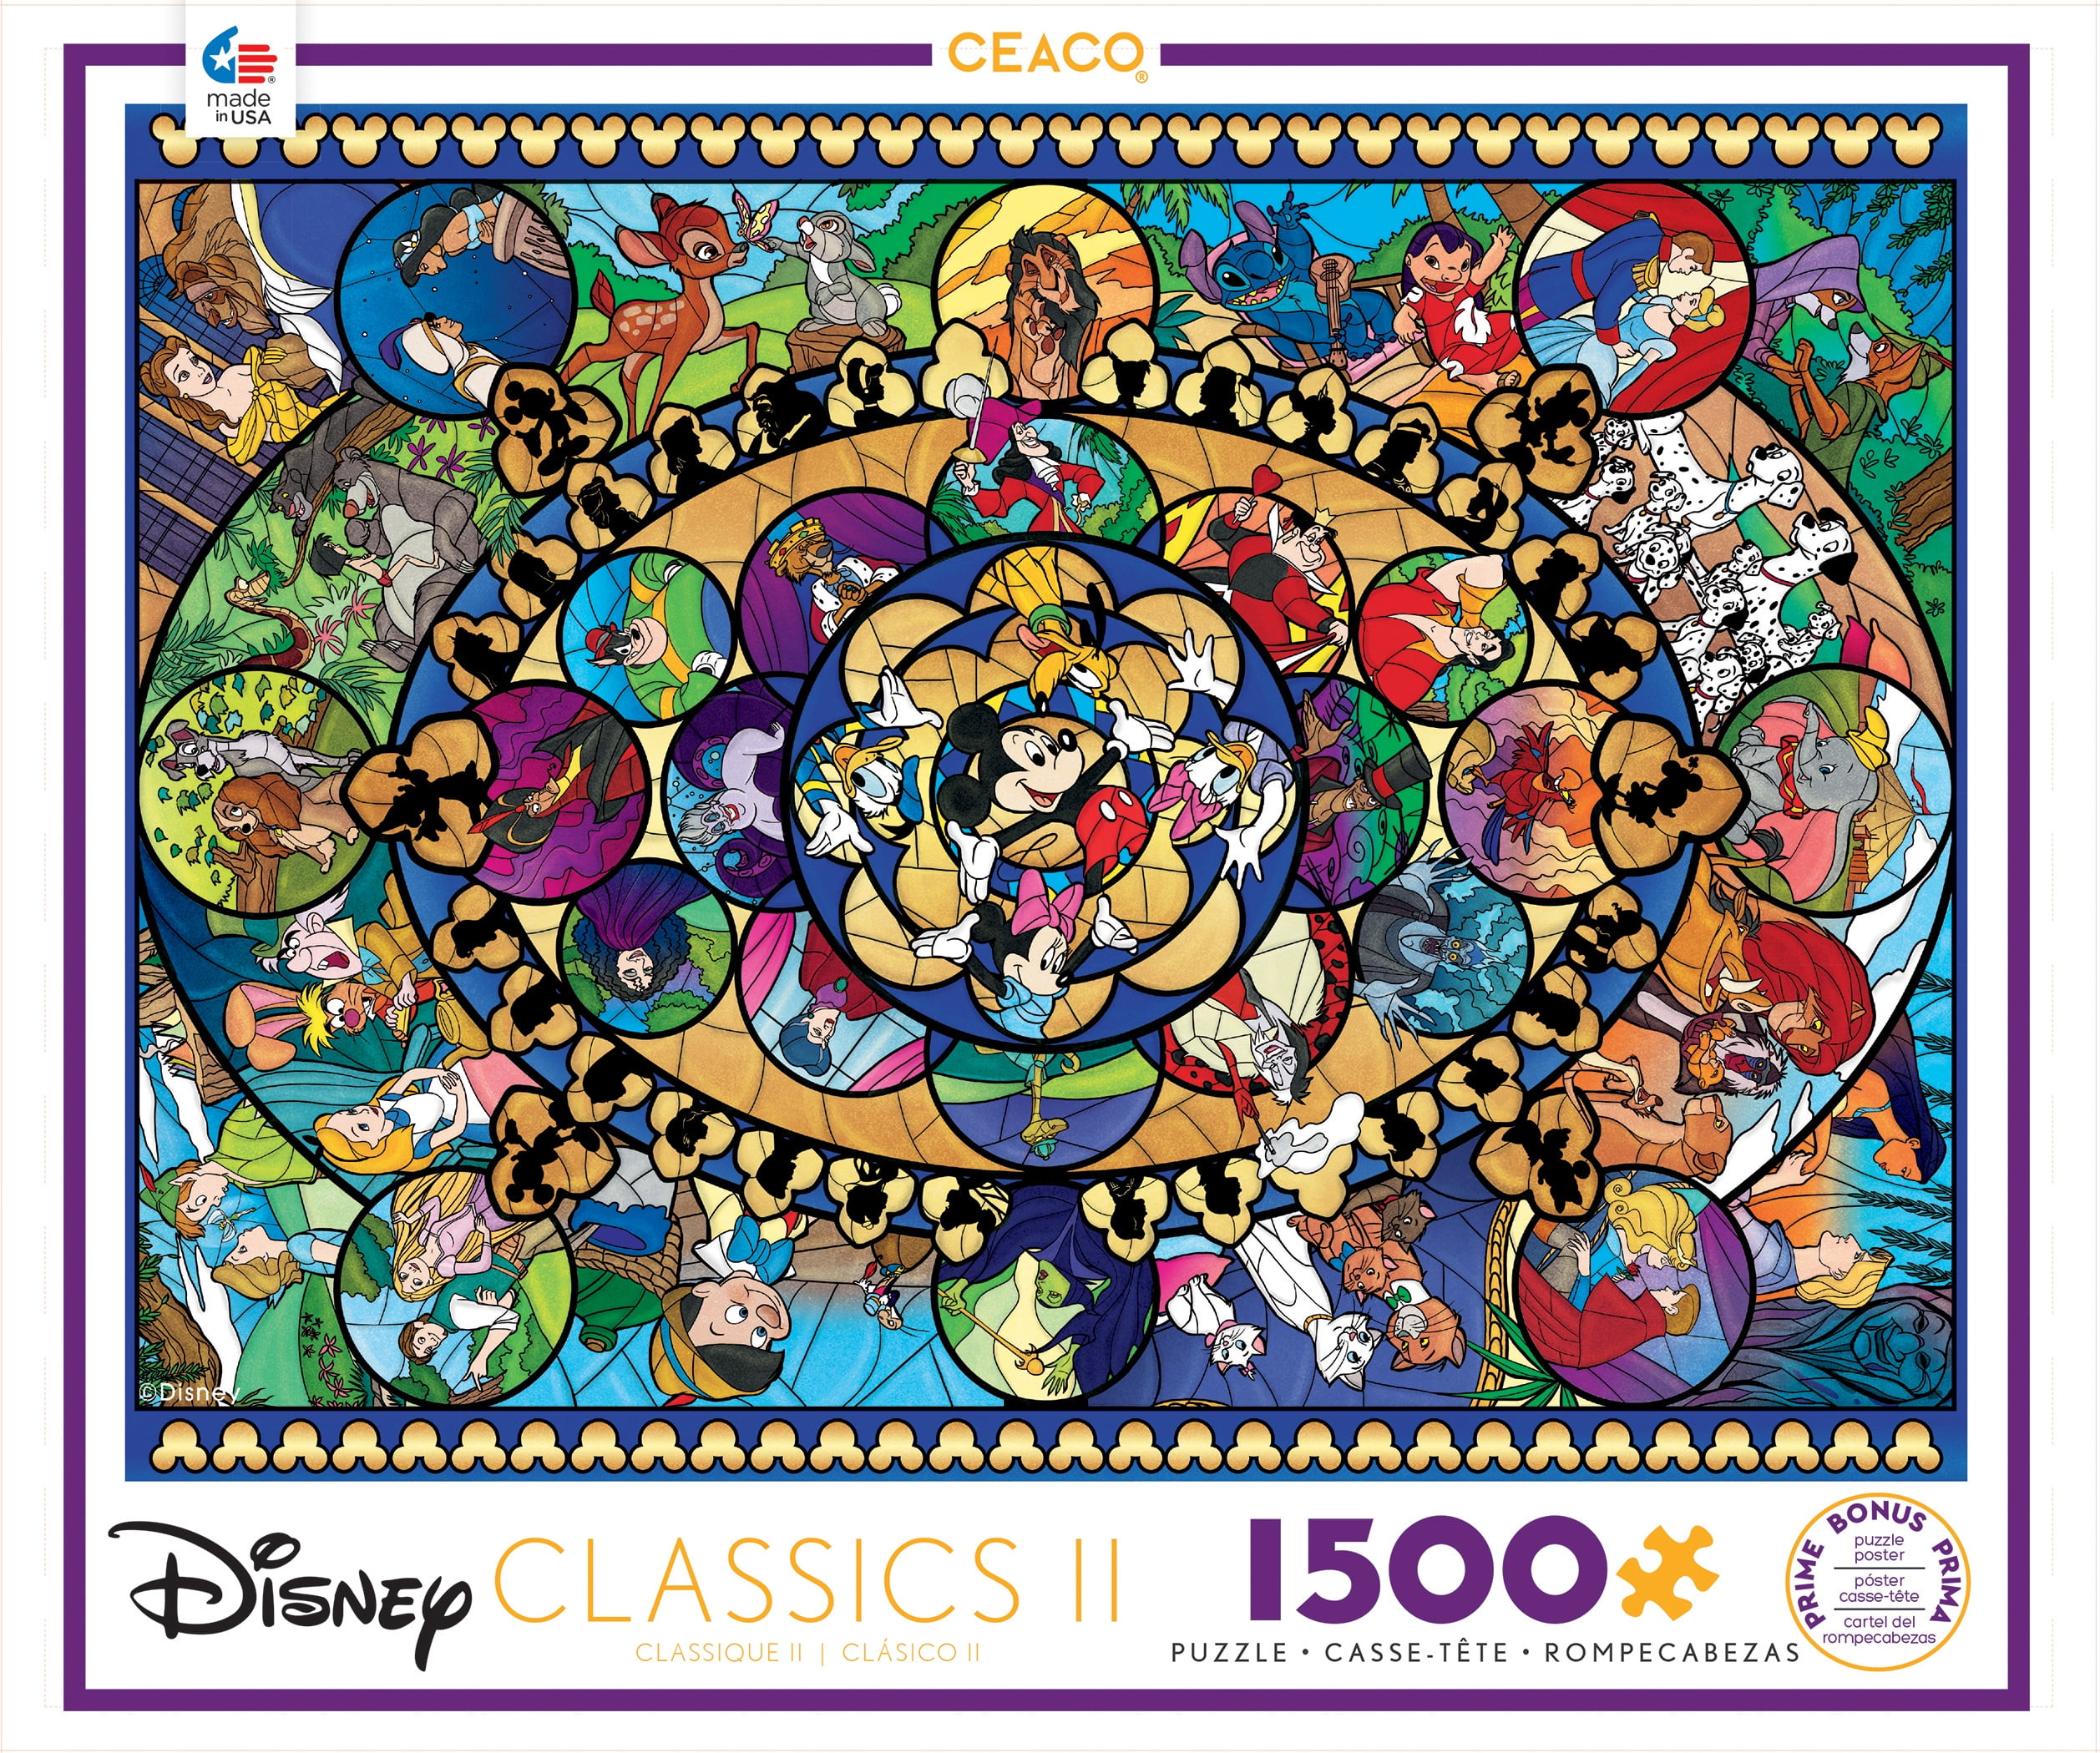 Ceaco Disney Classics Collage Jigsaw Puzzle 1500 PC Dreams Collection 32x24” USA for sale online 